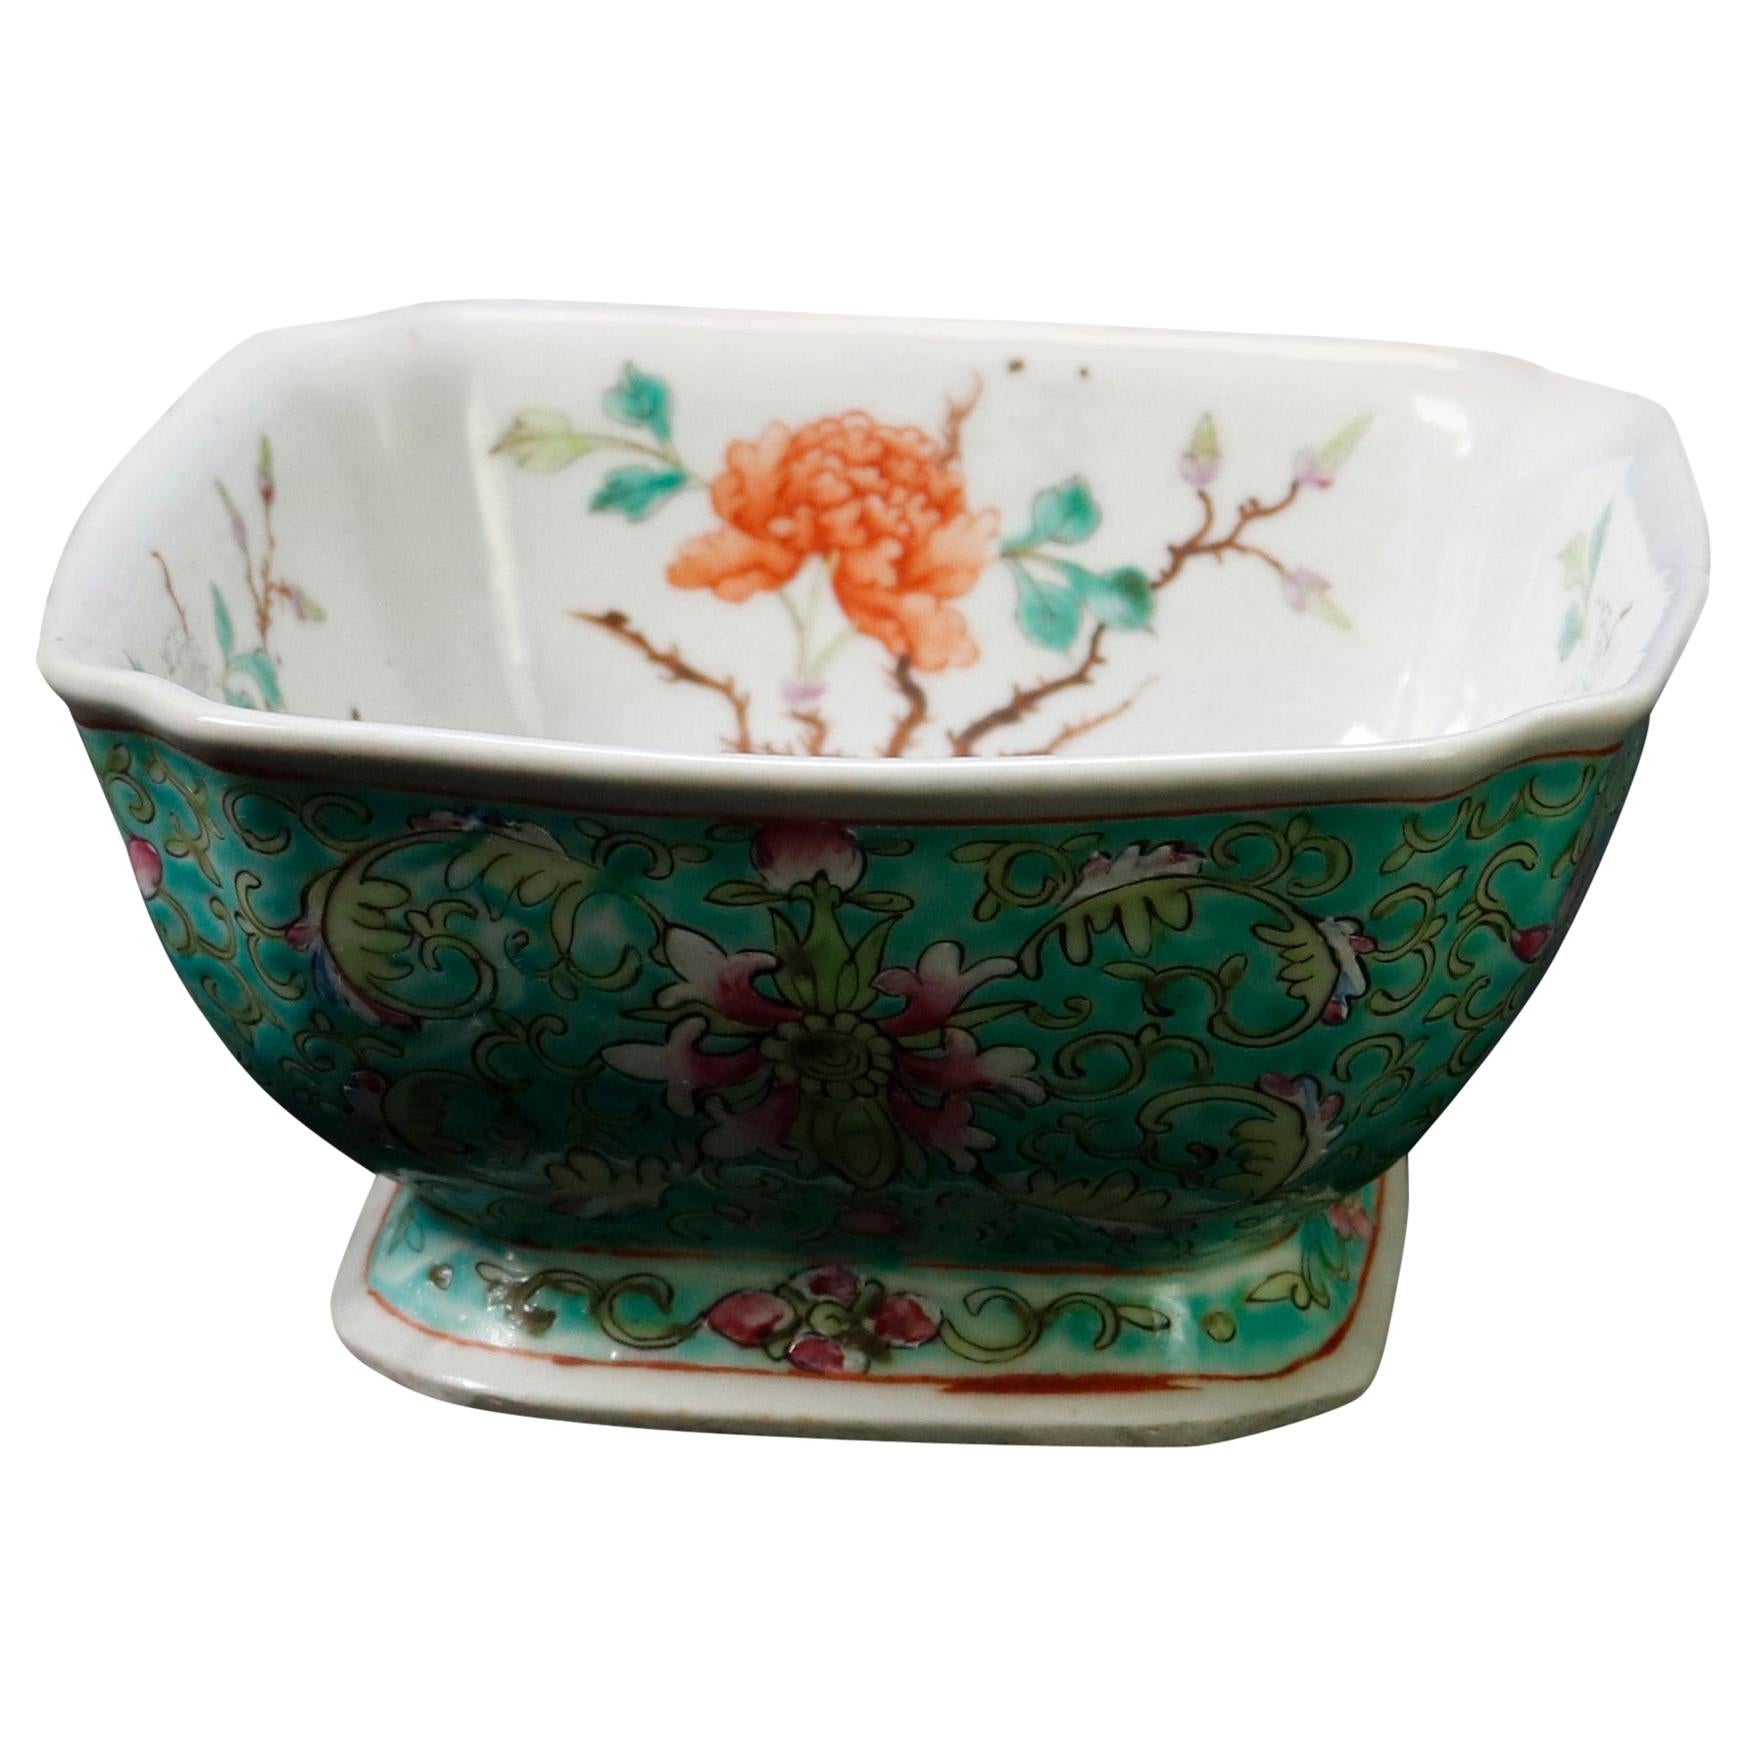 Antique Chinese Hand Painted Floral Celedon Decorated Bowl, Signed, 19th Century